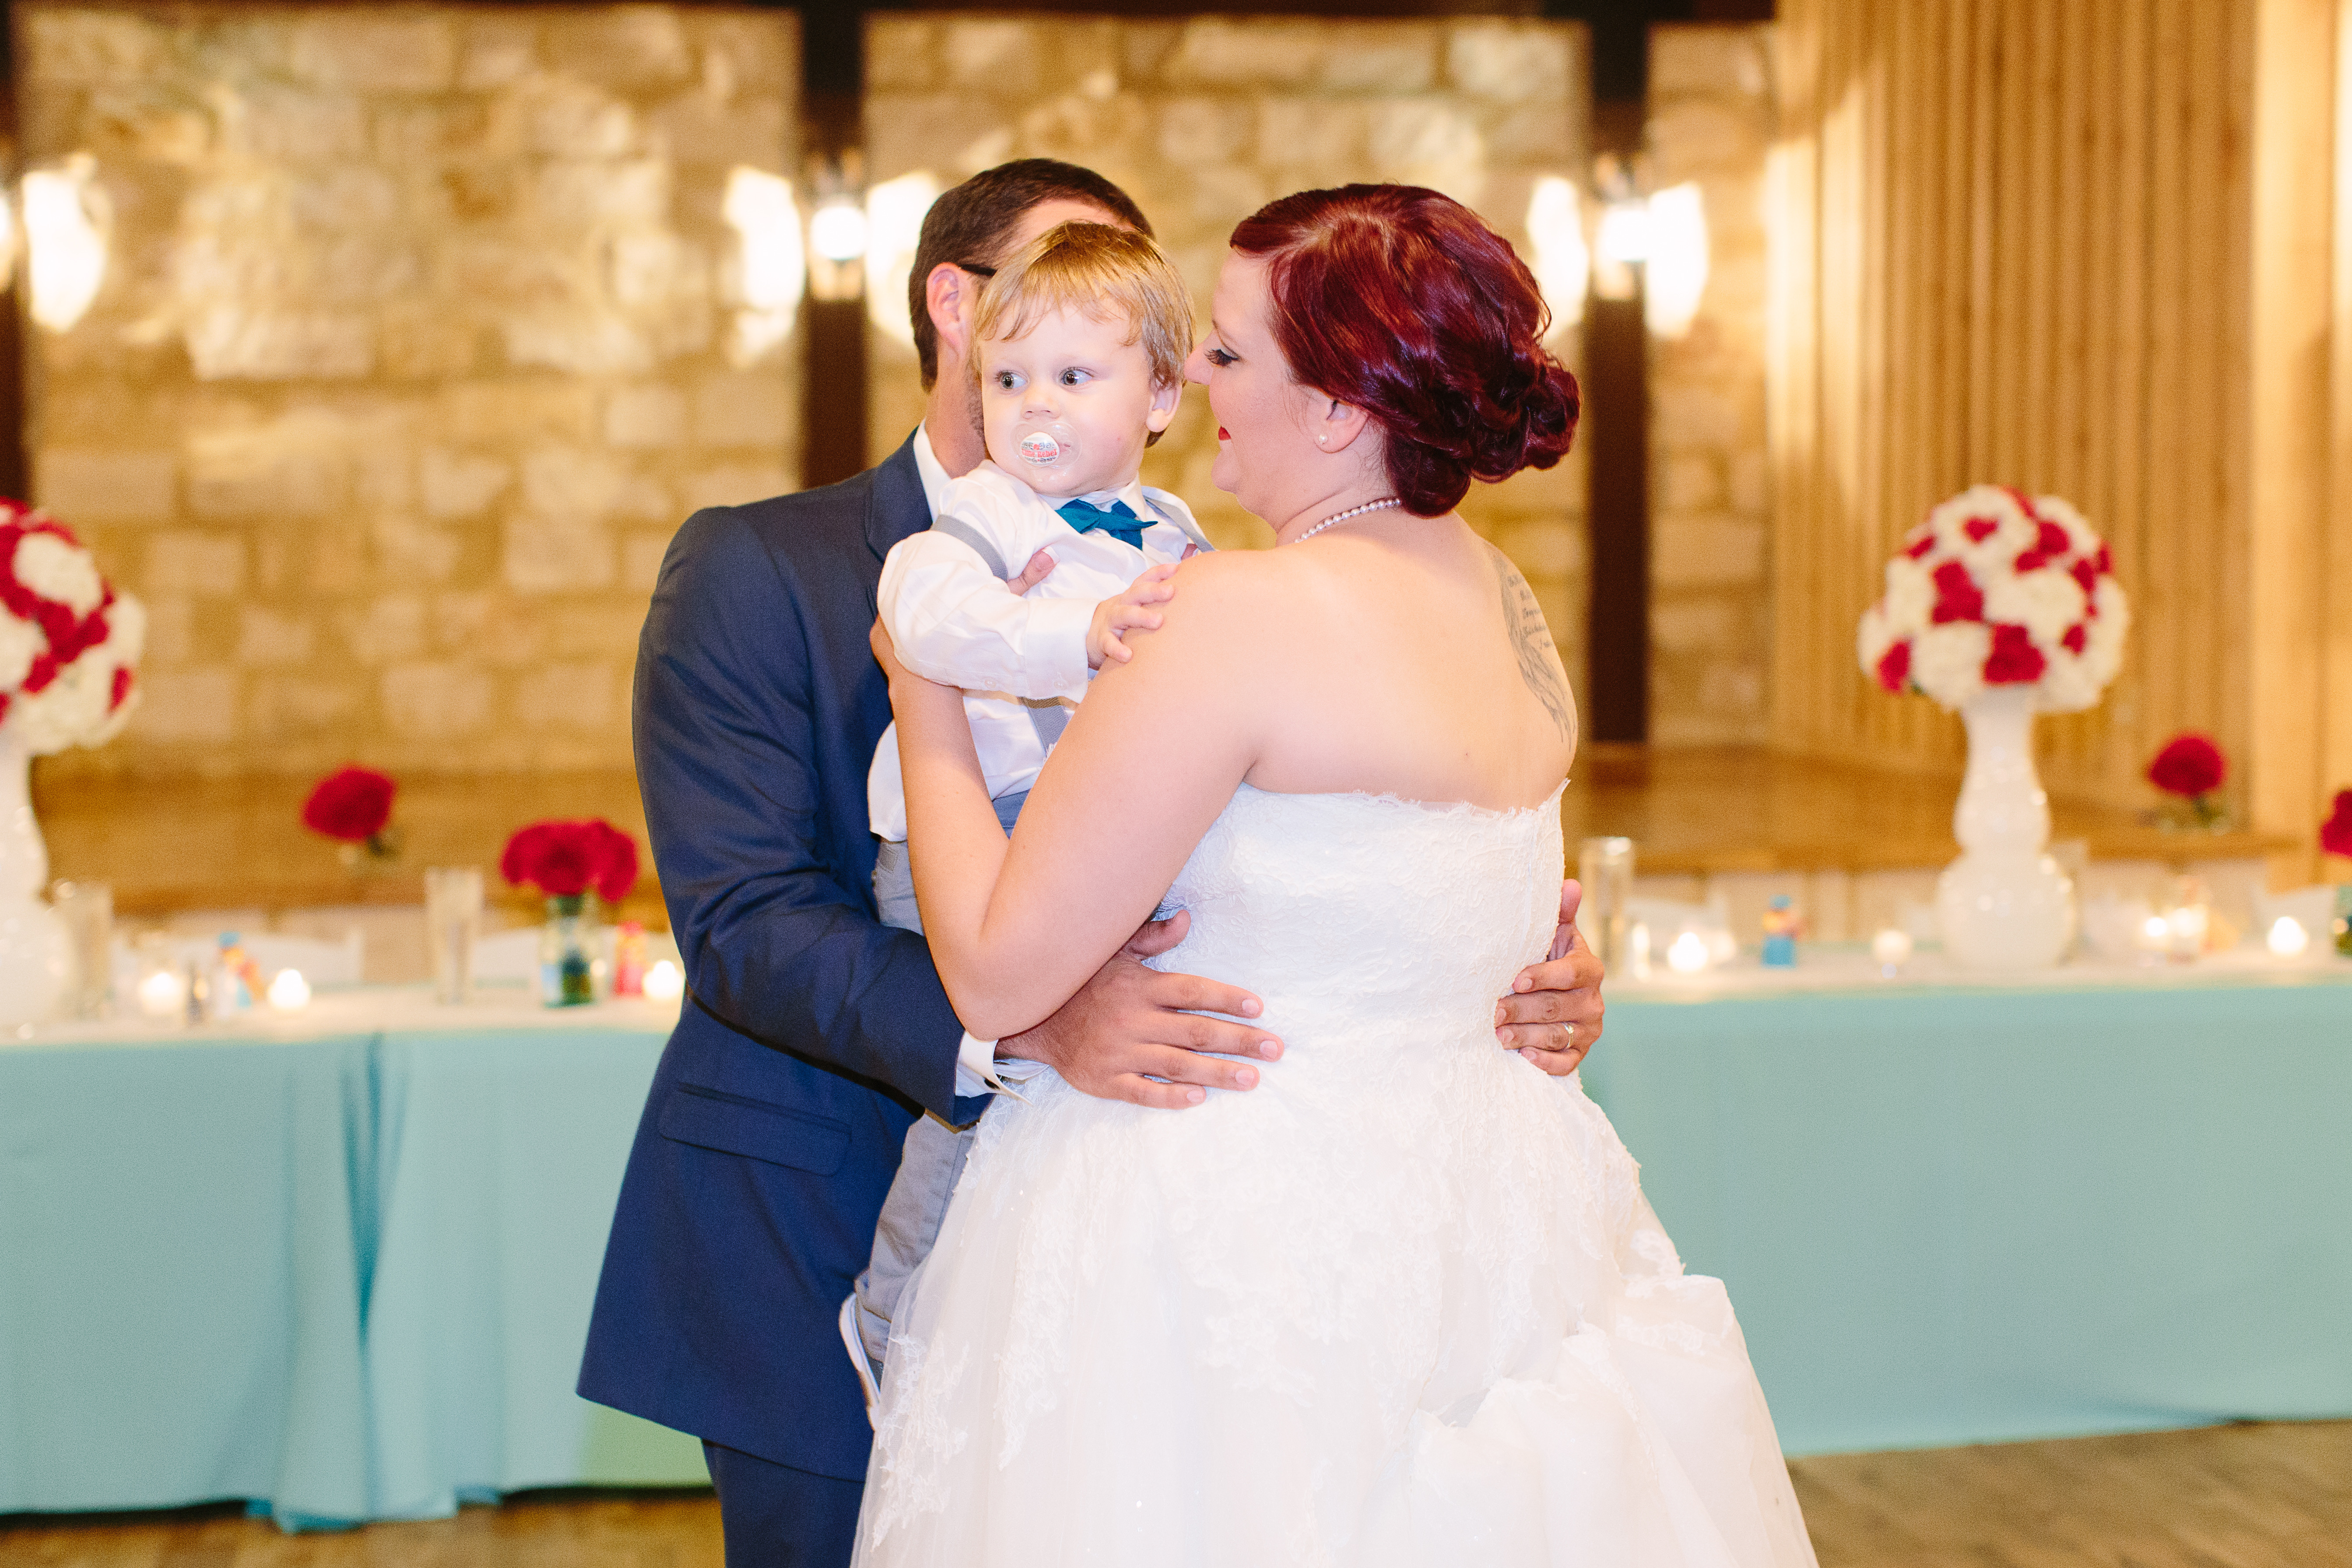 A bride and groom dance with their toddler